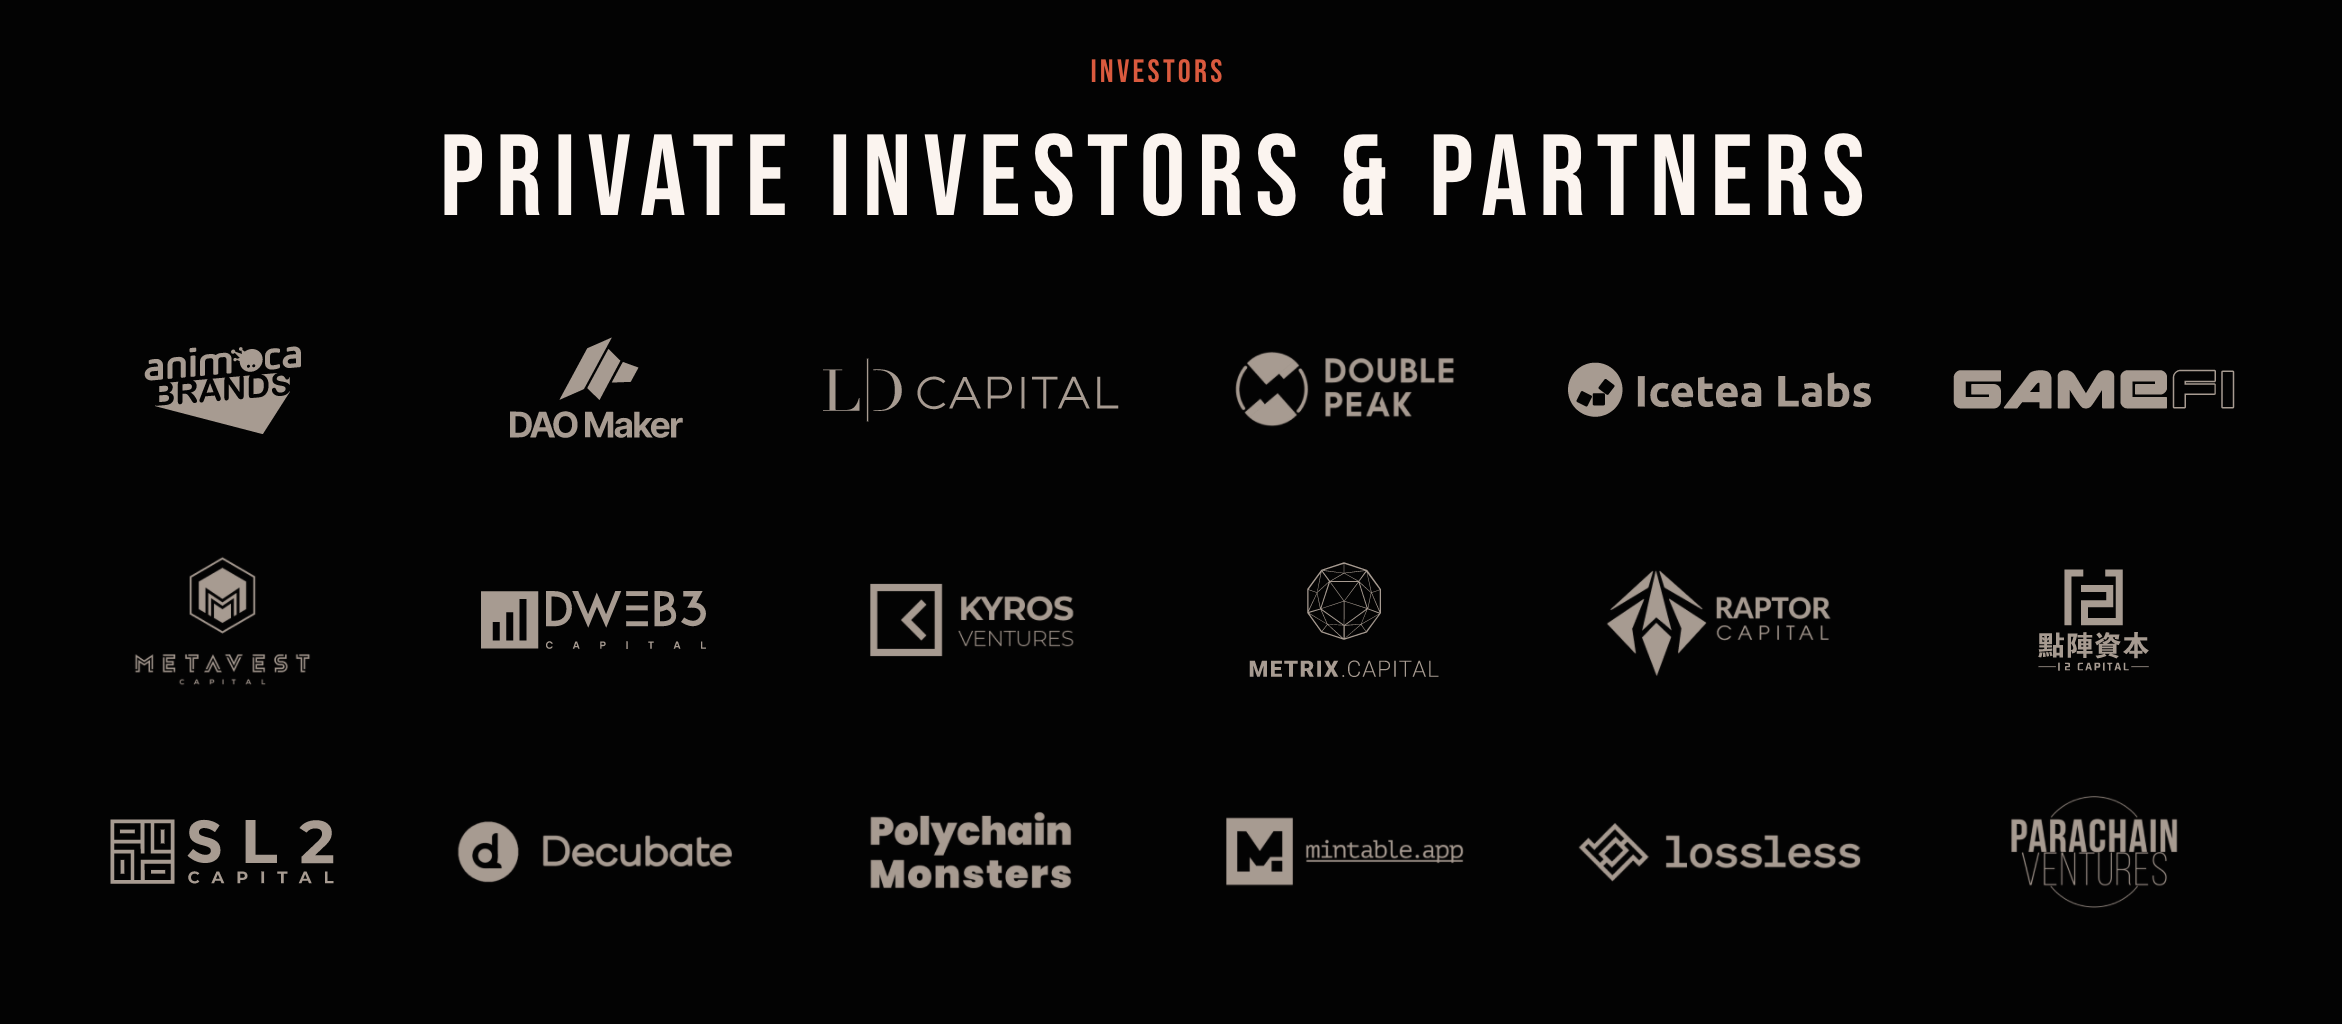 Engines of Fury Investors and Partners